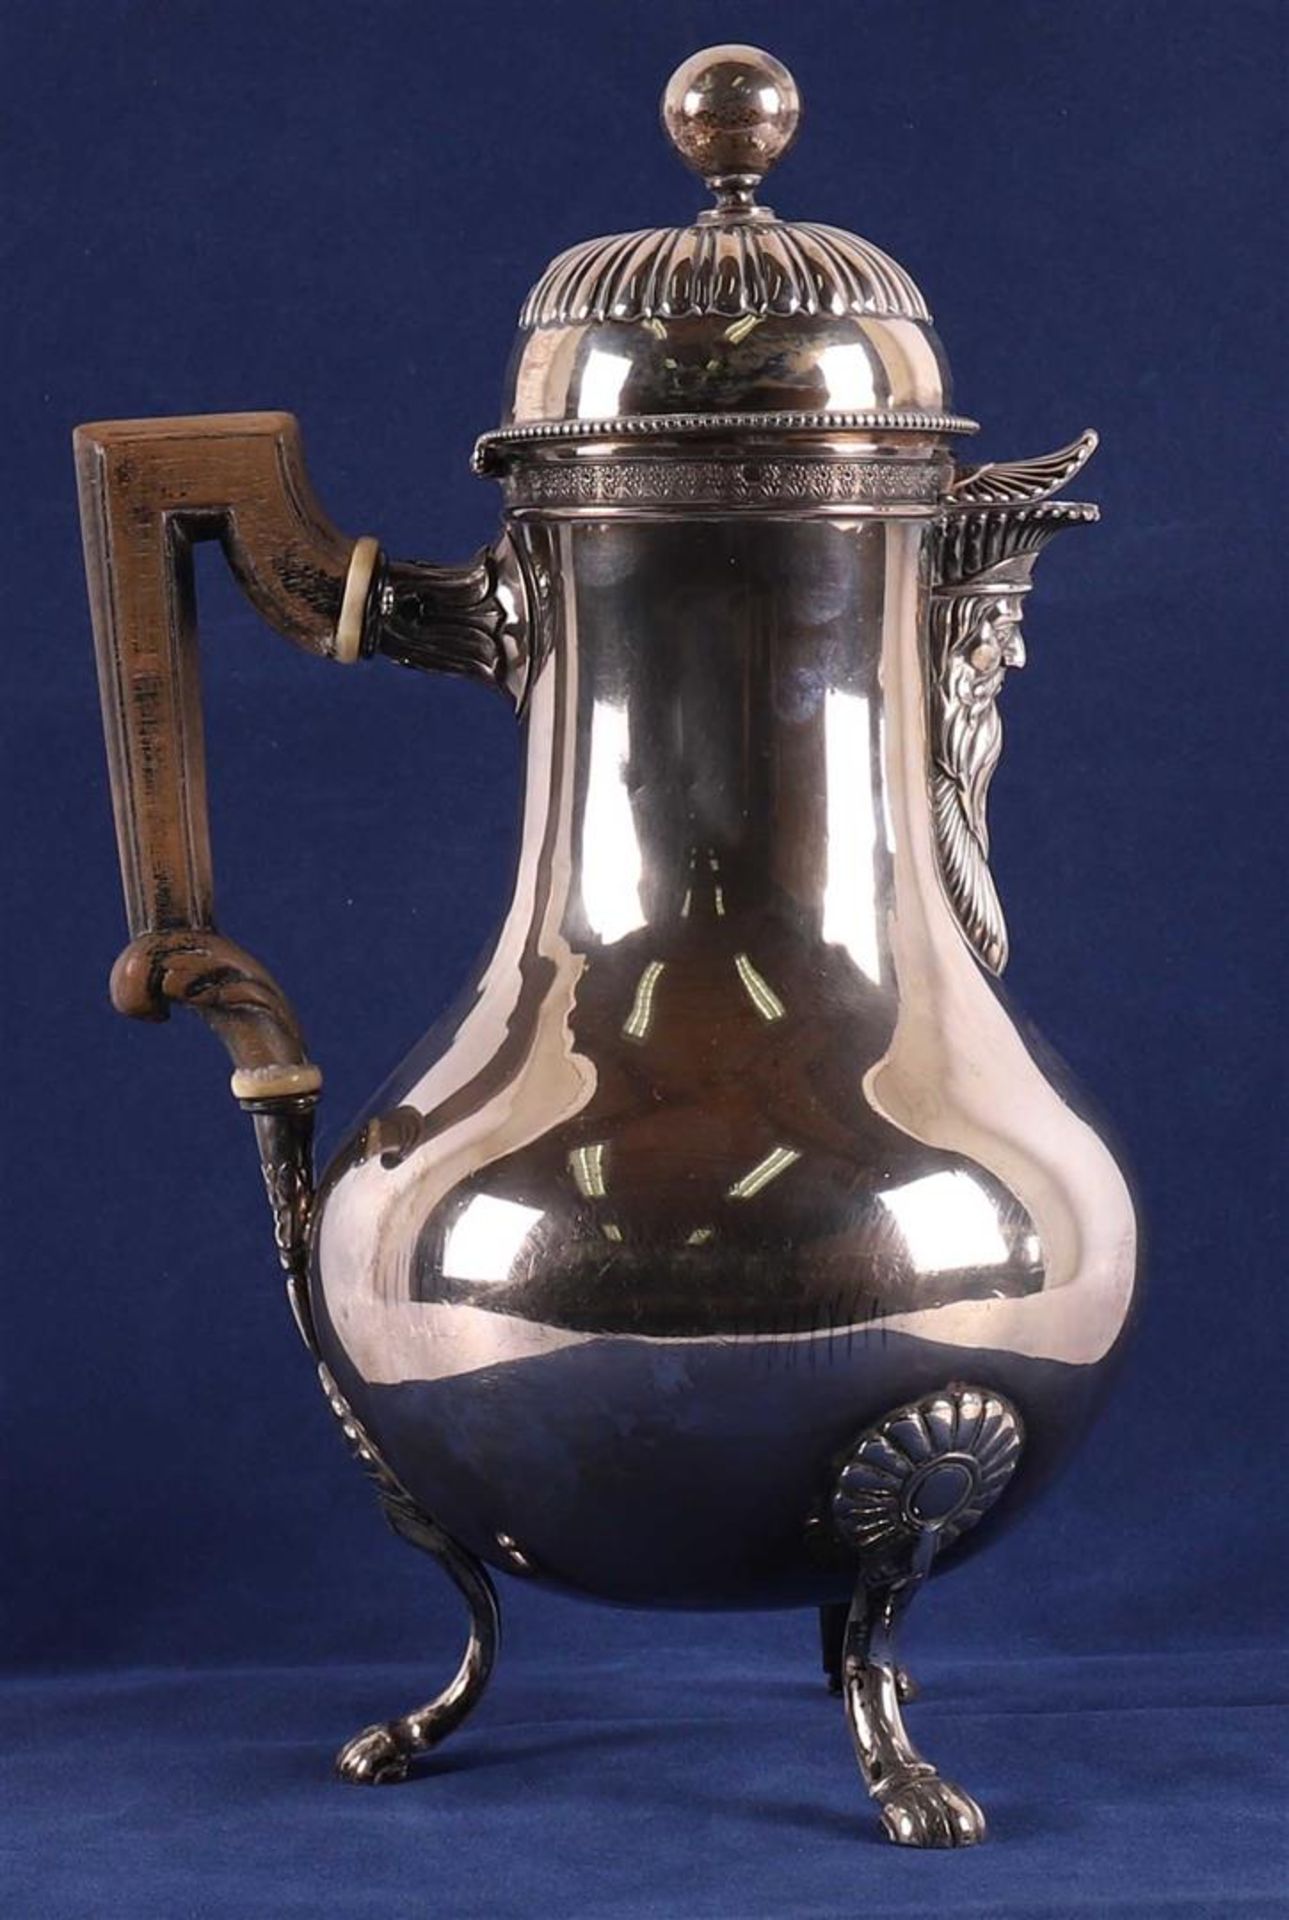 A baluster-shaped silver coffee lid jug, France, 2nd half of the 18th century.